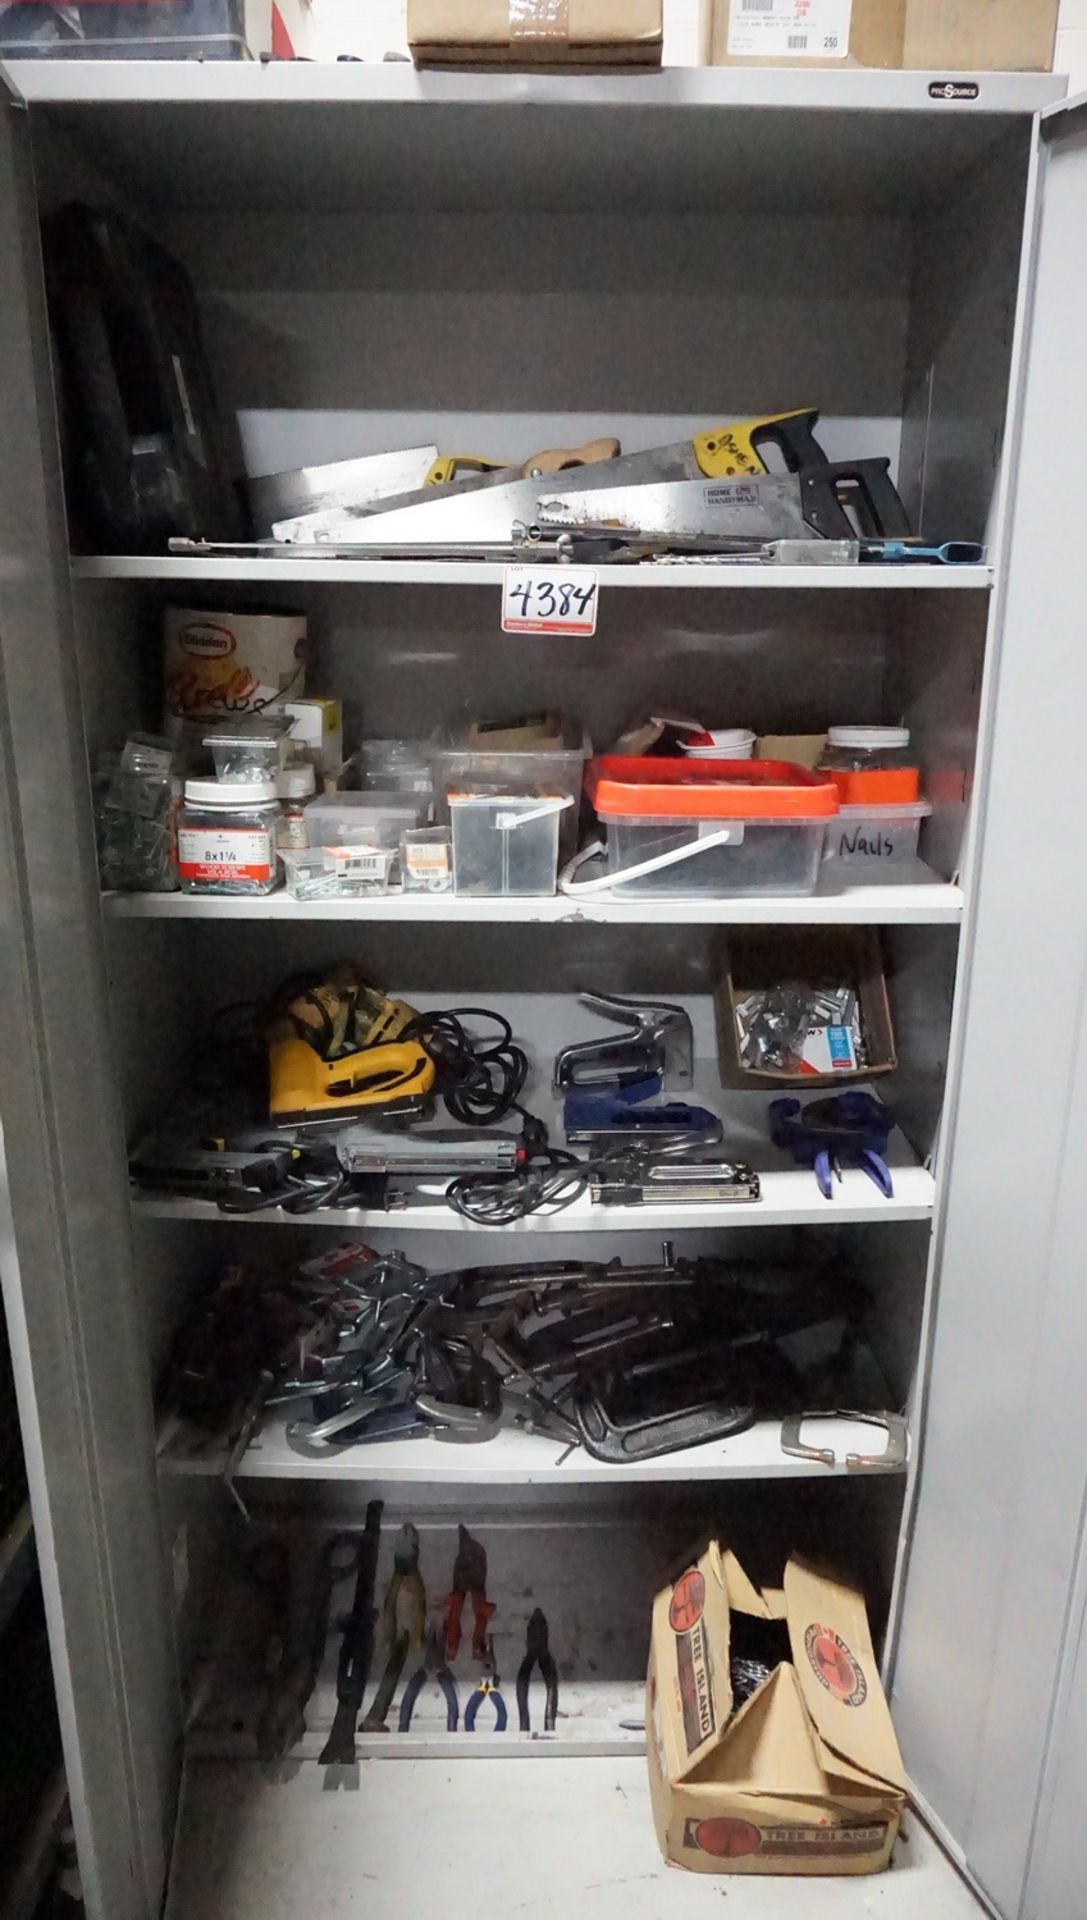 LOT - ELECTRIC STAPLE GUNS, CLAMPS, SAWS W/ 6' GREY CABINET